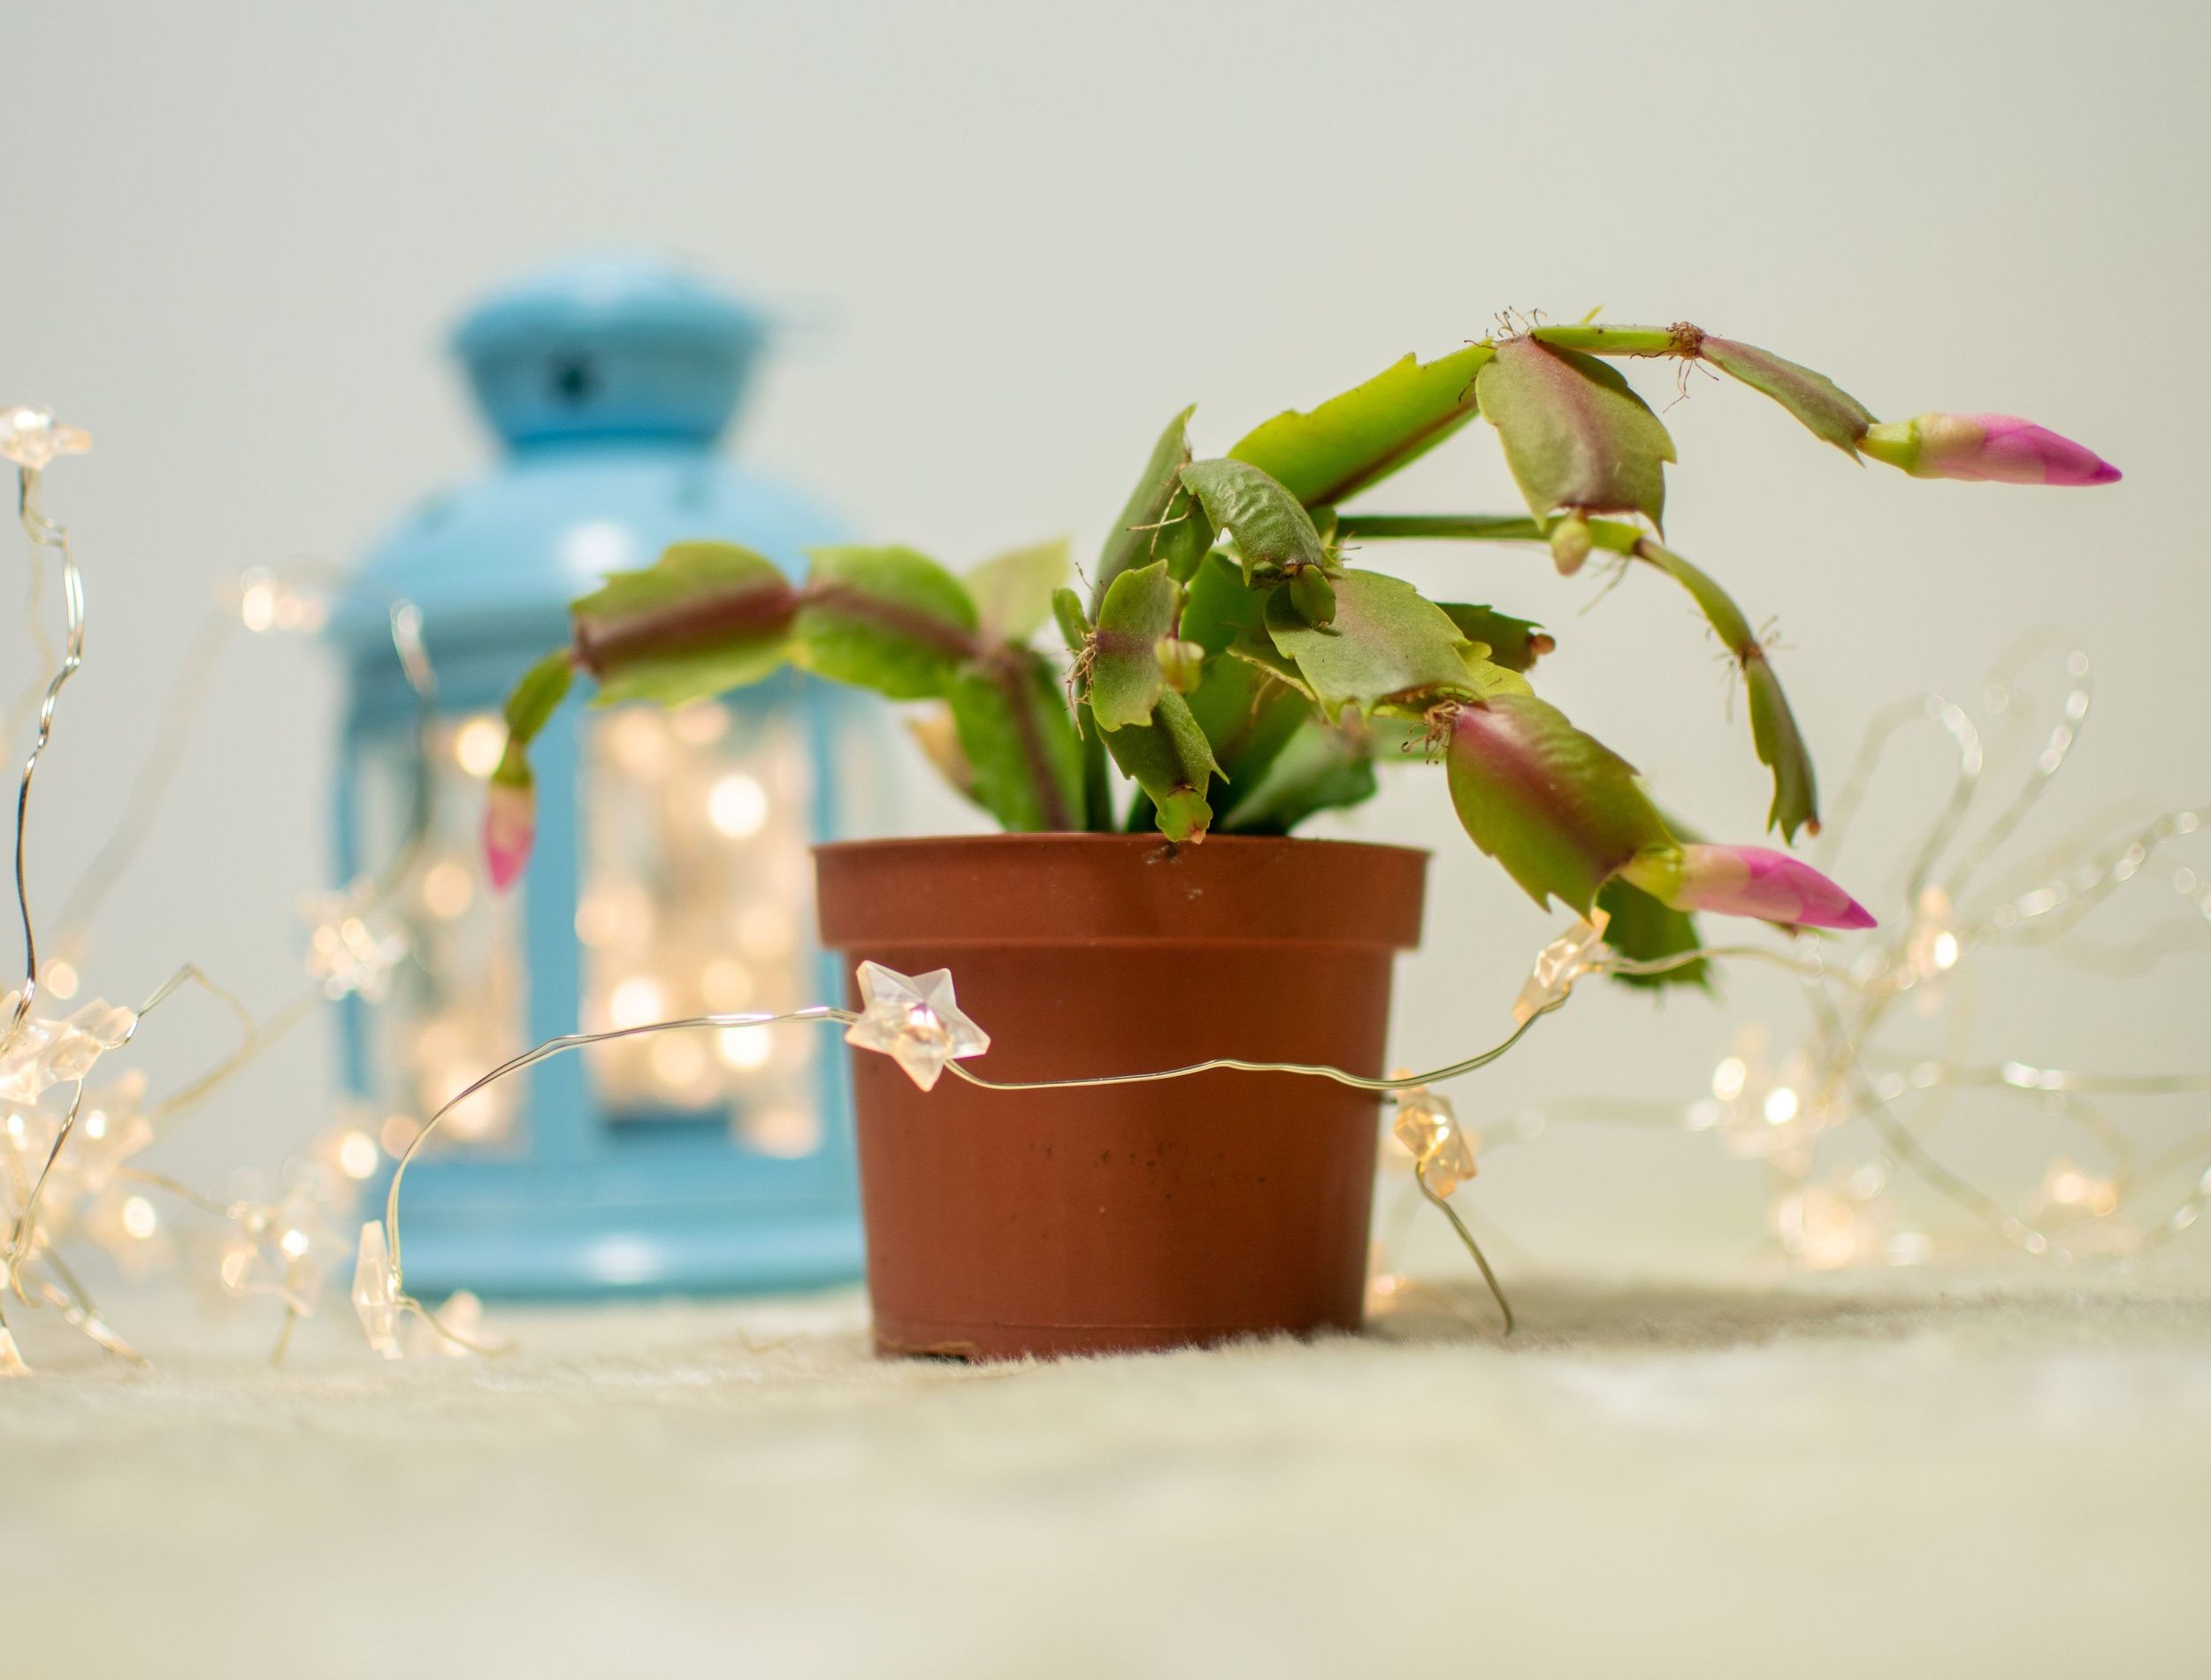 Very wonderful Christmas cactus zygocactus with pink blooms in front of blue lightning lantern and little lights around